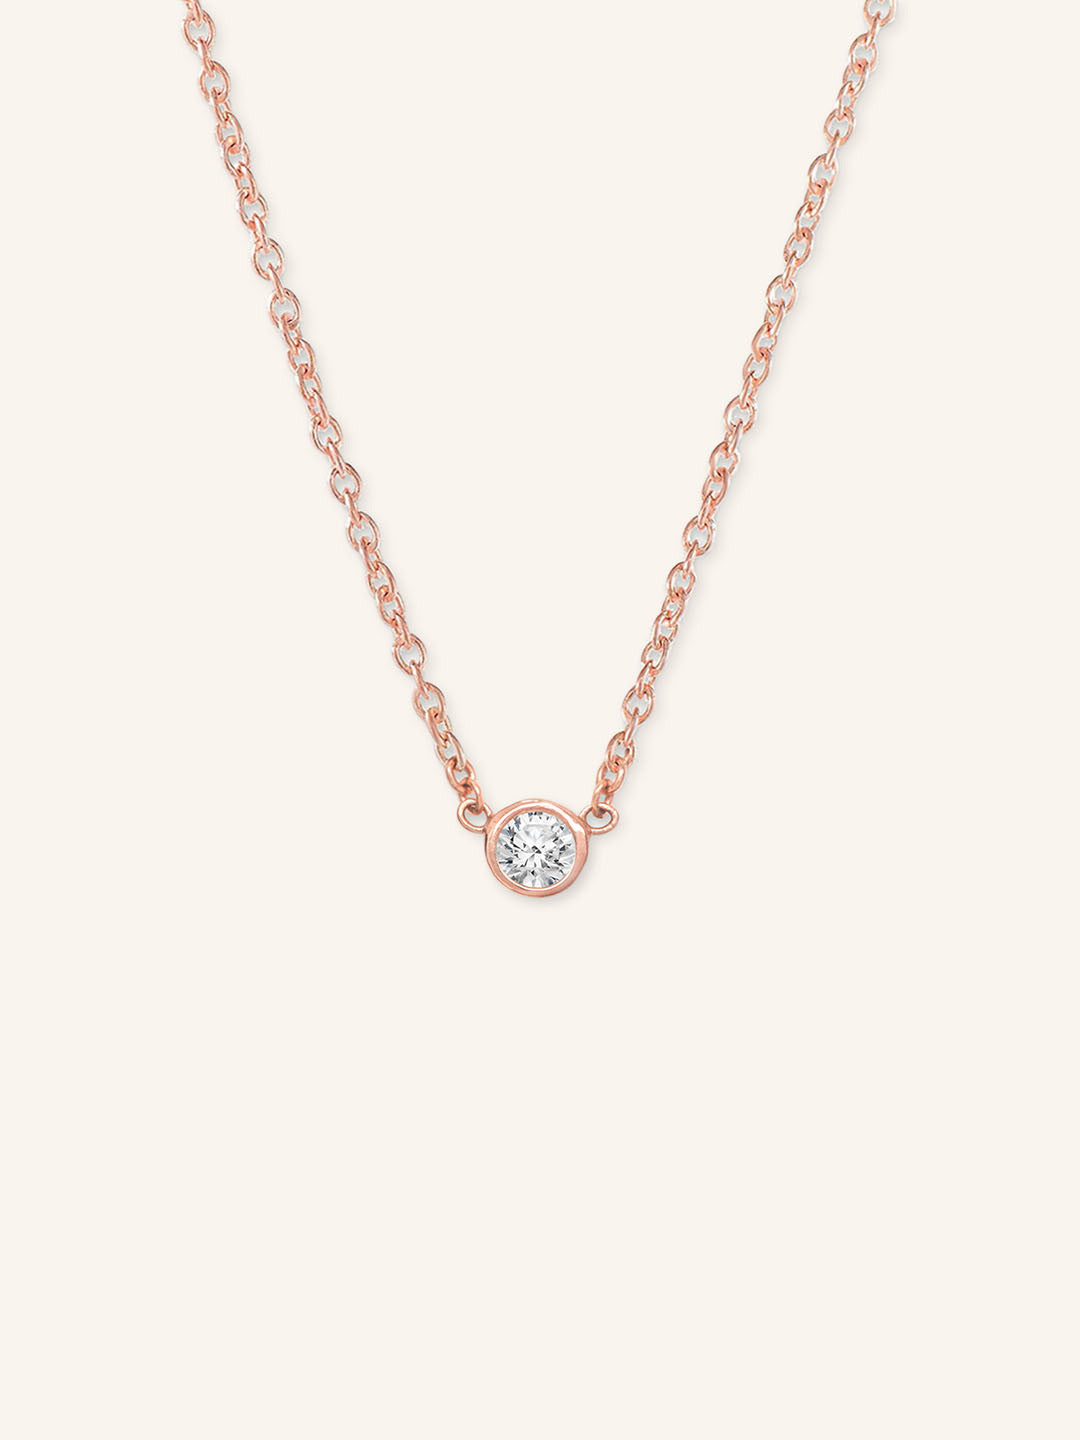 Fall into Autumn White Sapphire Necklace